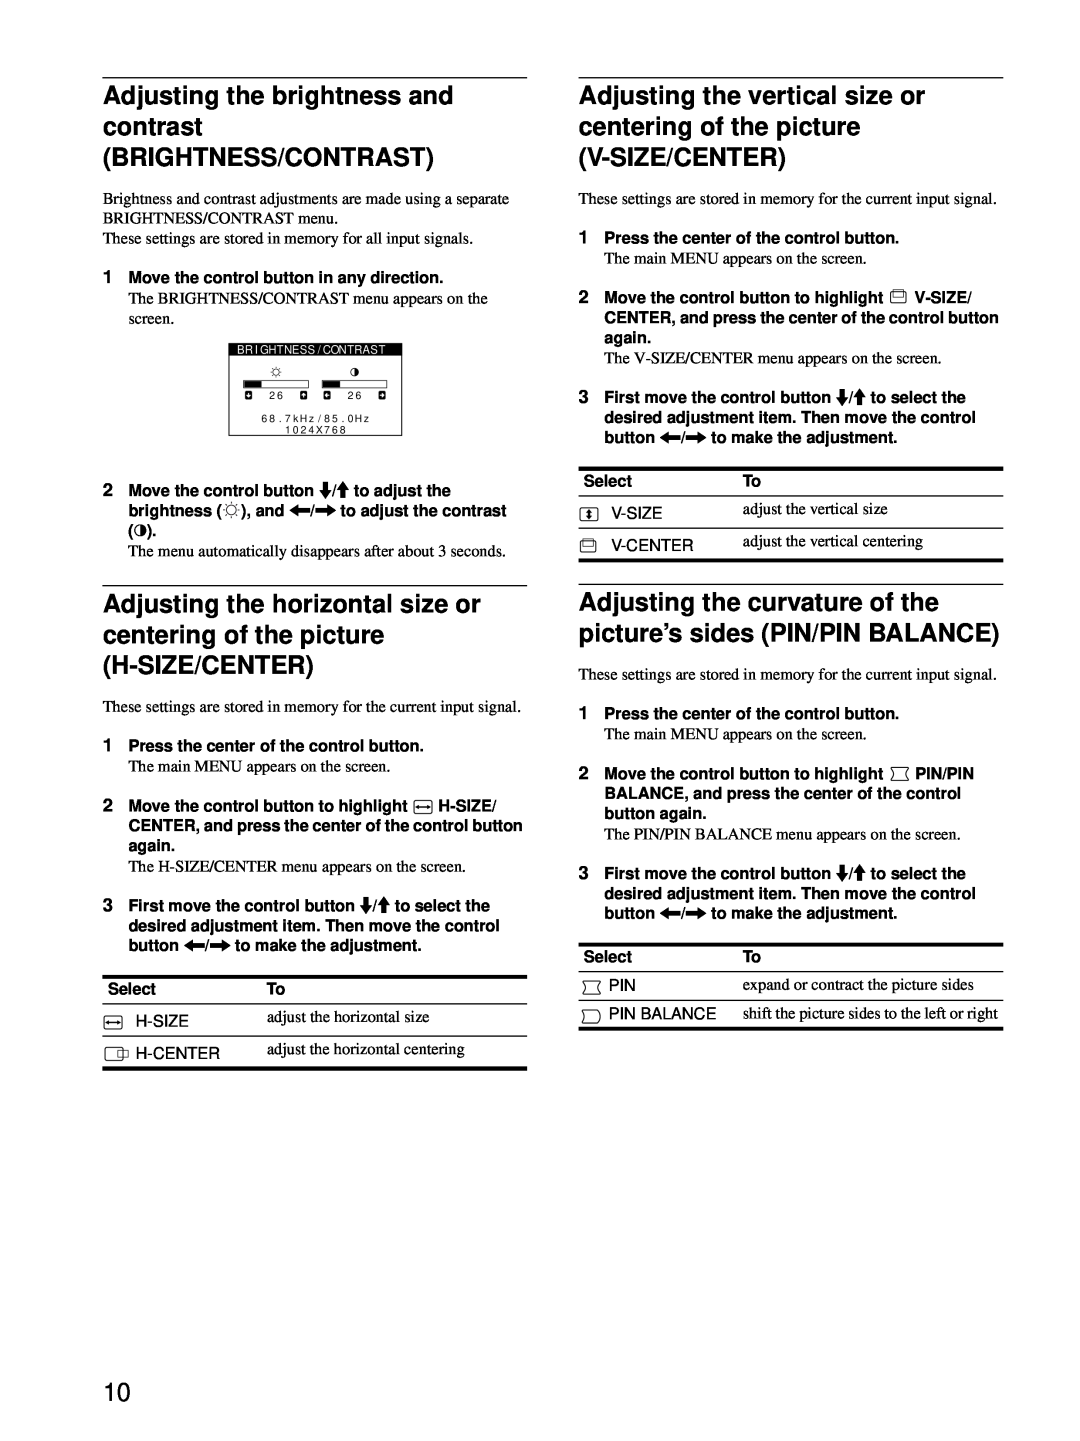 Sony HMD-A220 operating instructions Adjusting the brightness and contrast BRIGHTNESS/CONTRAST, adjust the horizontal size 